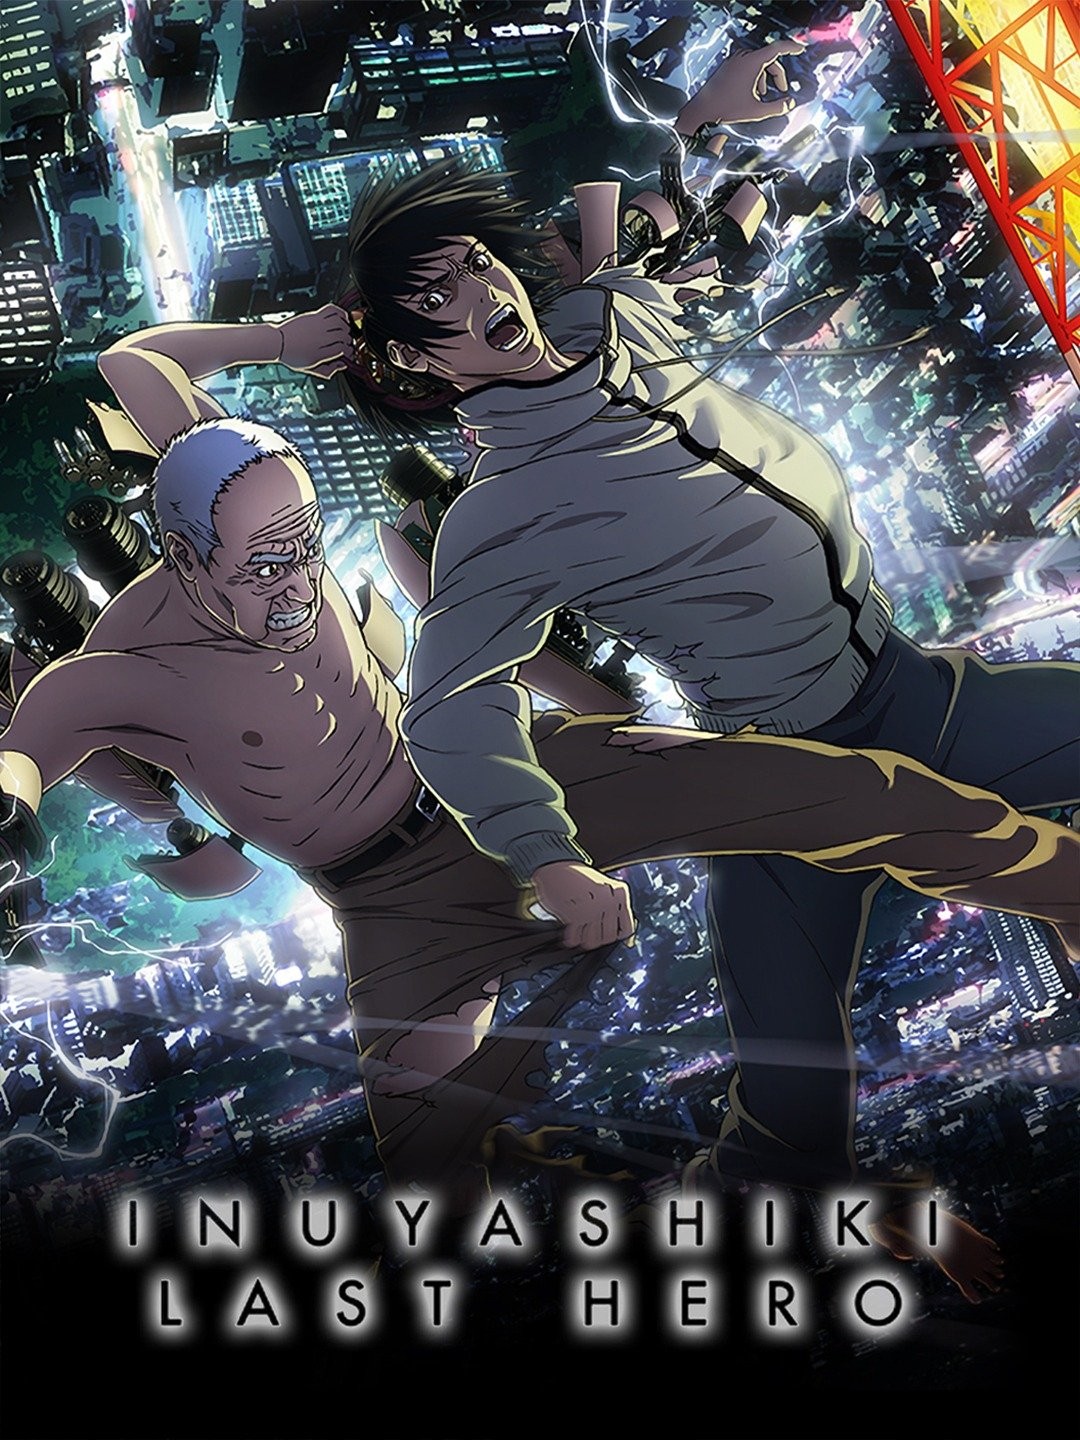 Where to watch Inuyashiki anime Streaming platforms explained